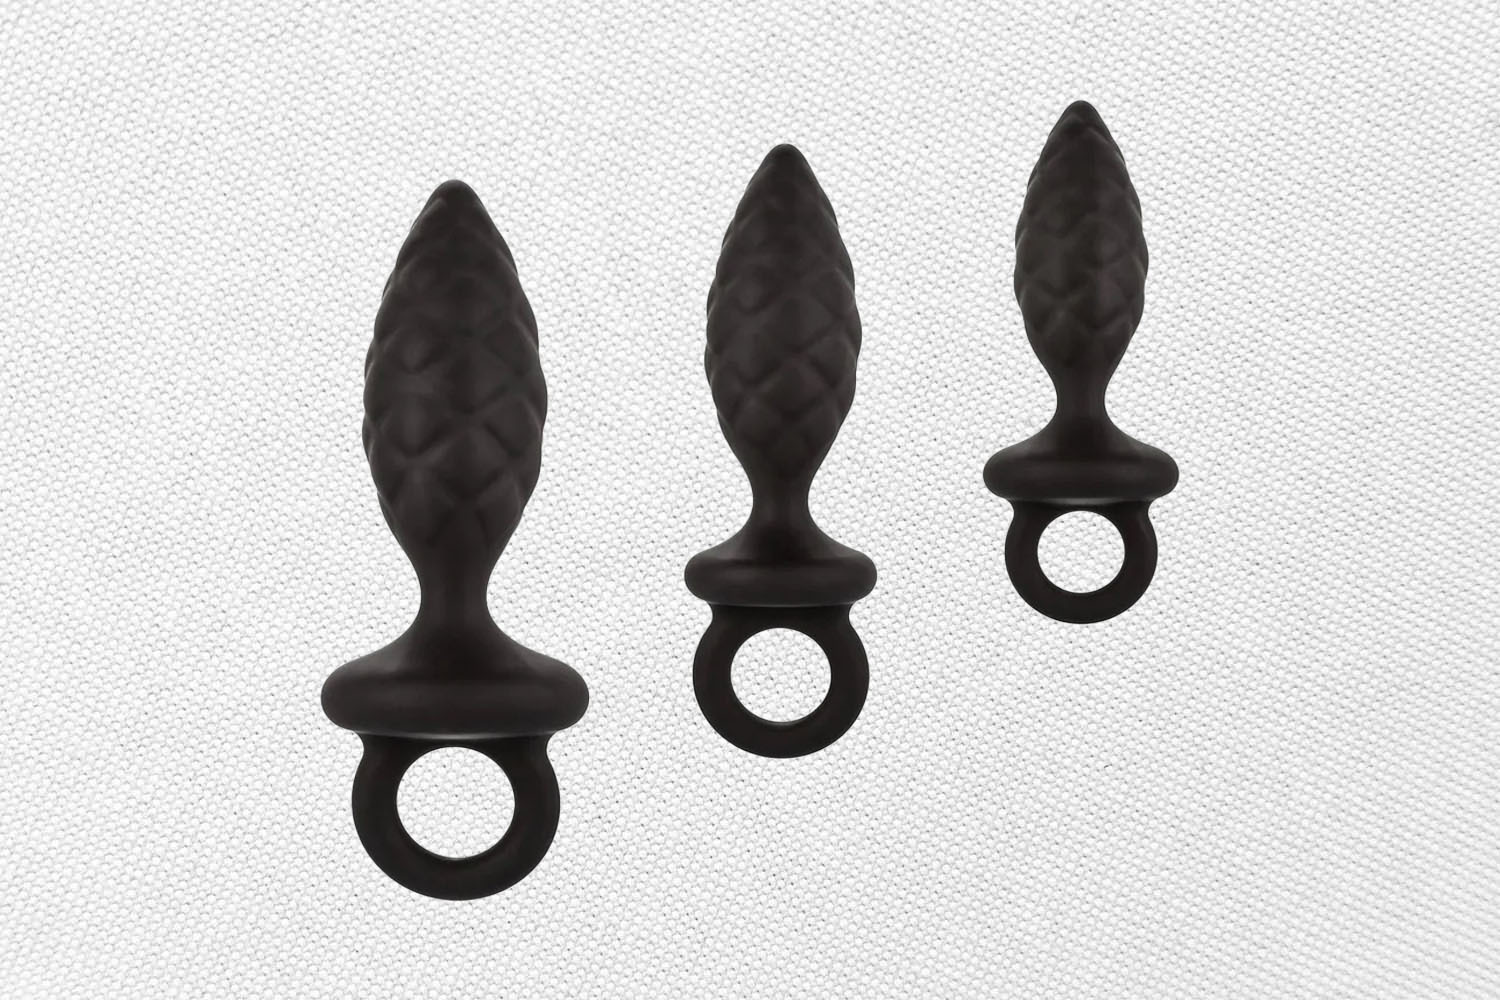 The Cal Exotics textured anal toy on a white background